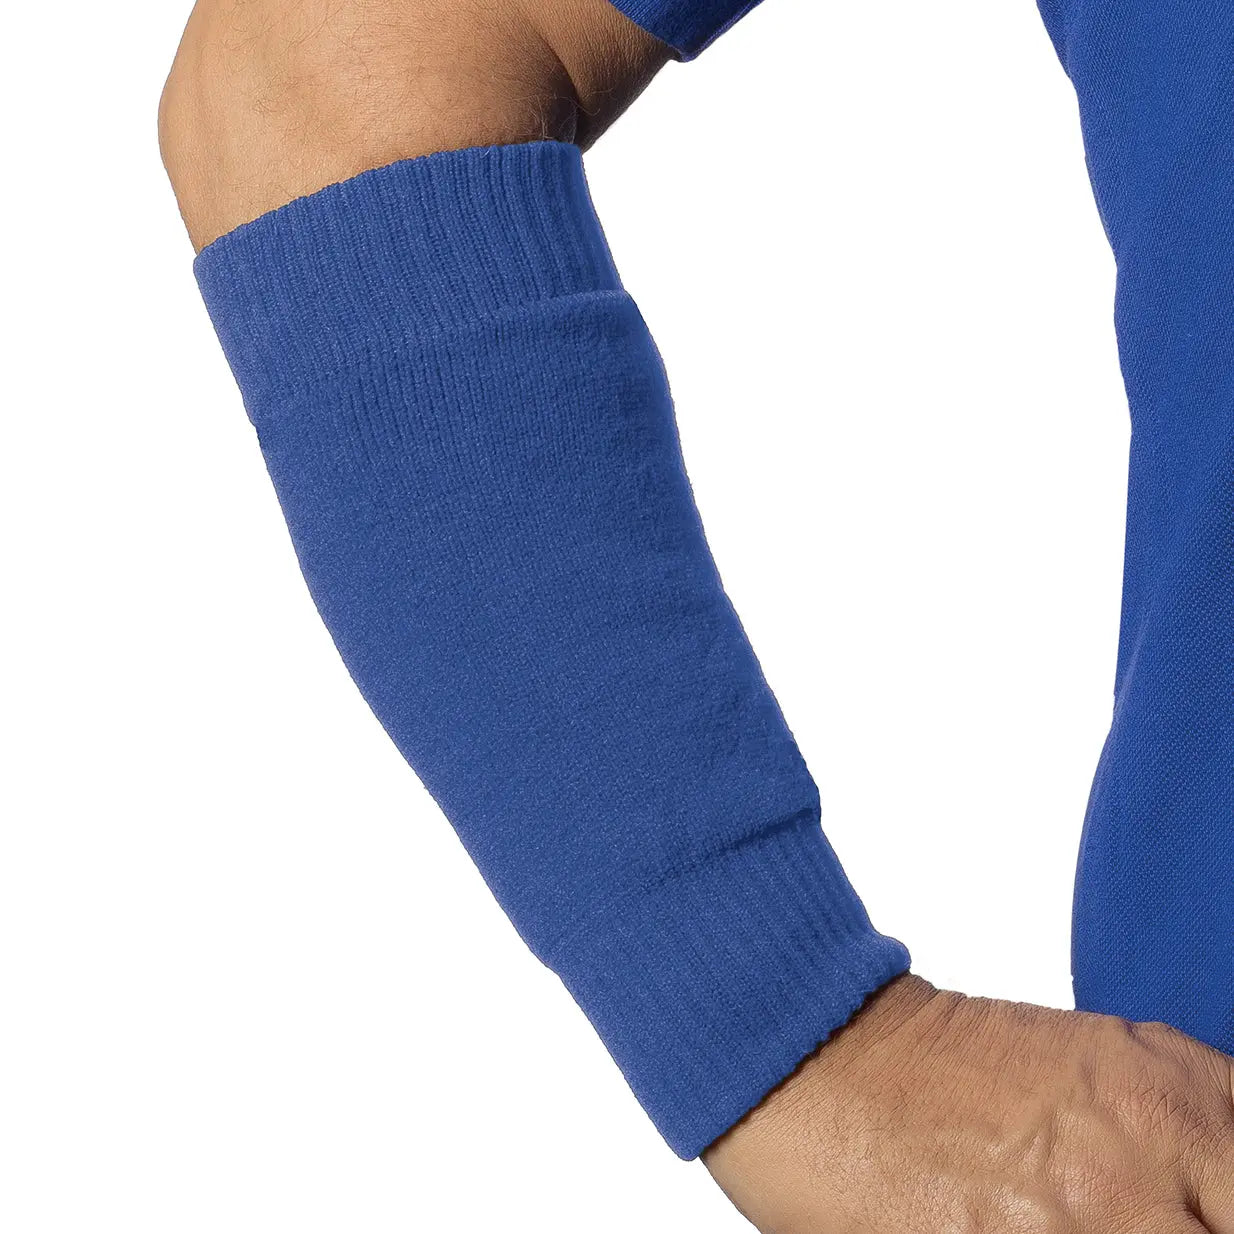 Forearm Sleeves -  Protect Frail Skin. 